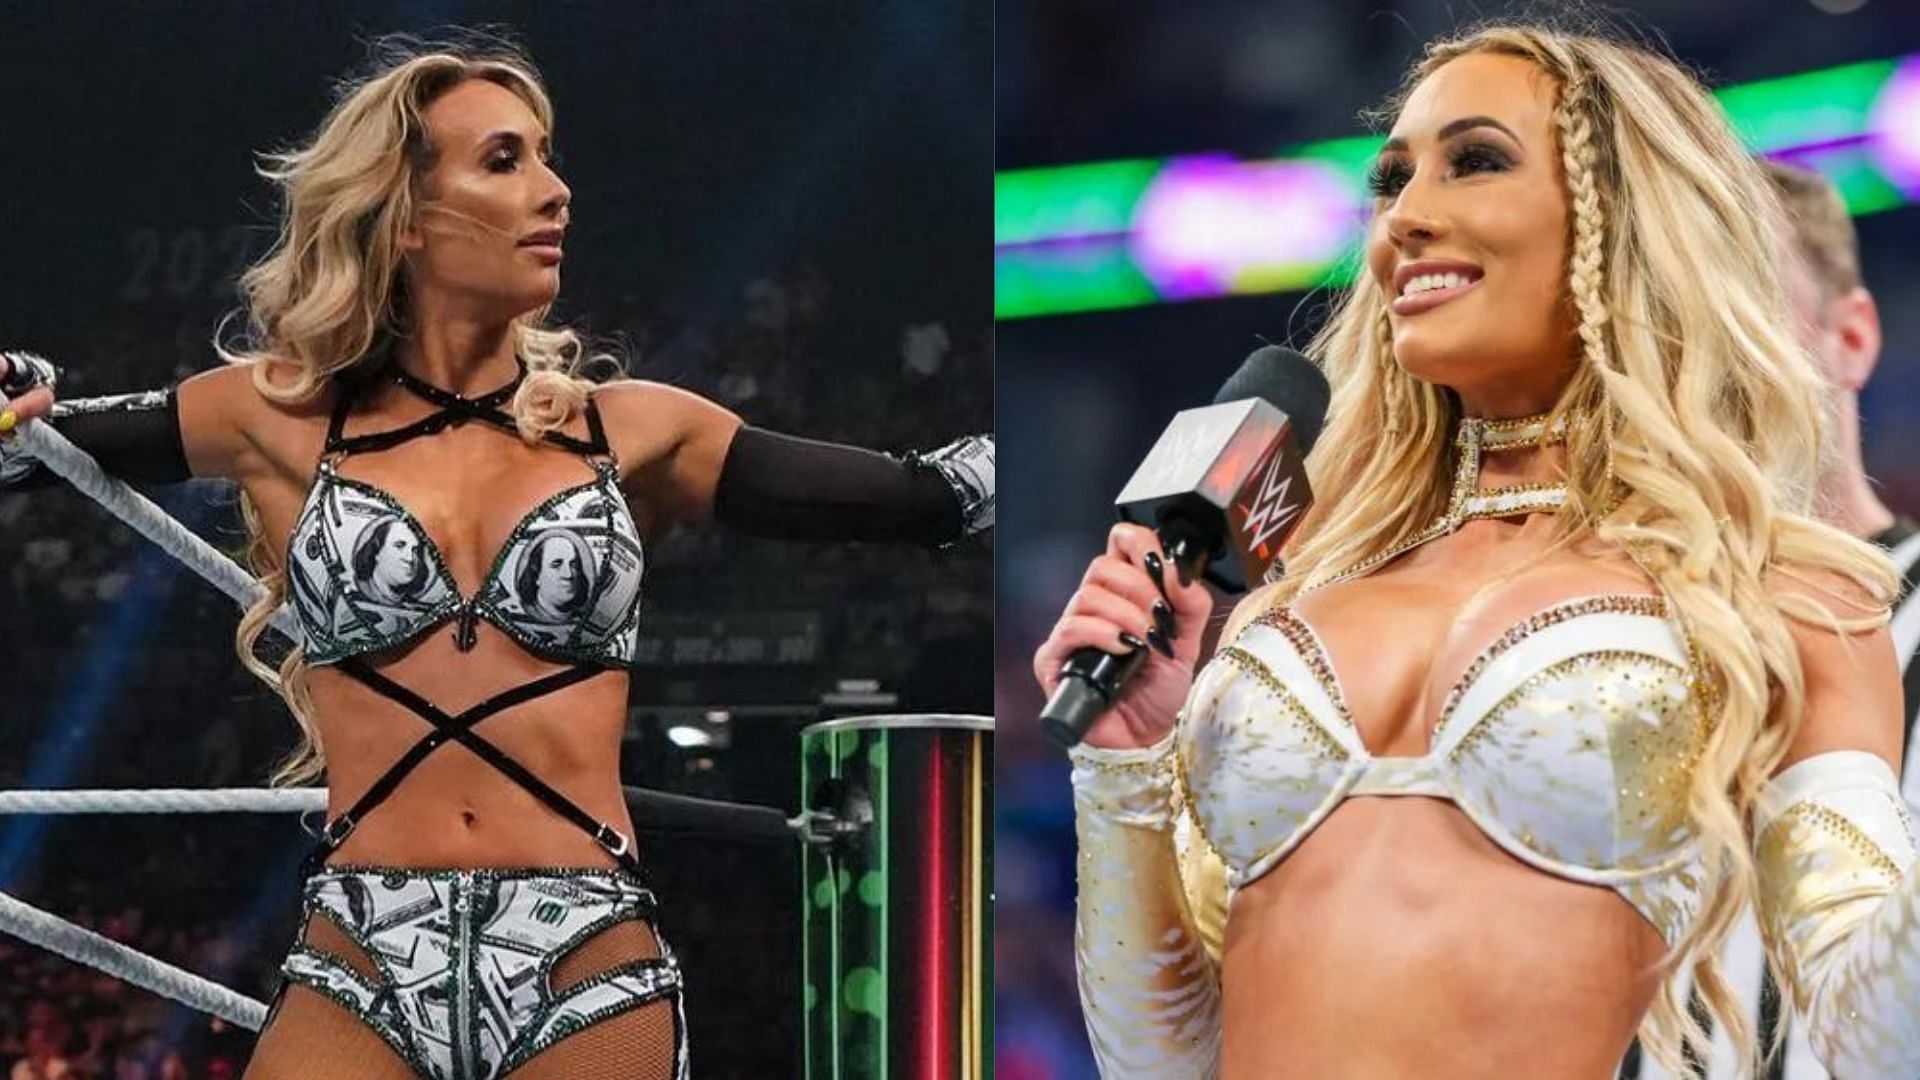 What happened to Carmella that caused her months of absence in WWE?